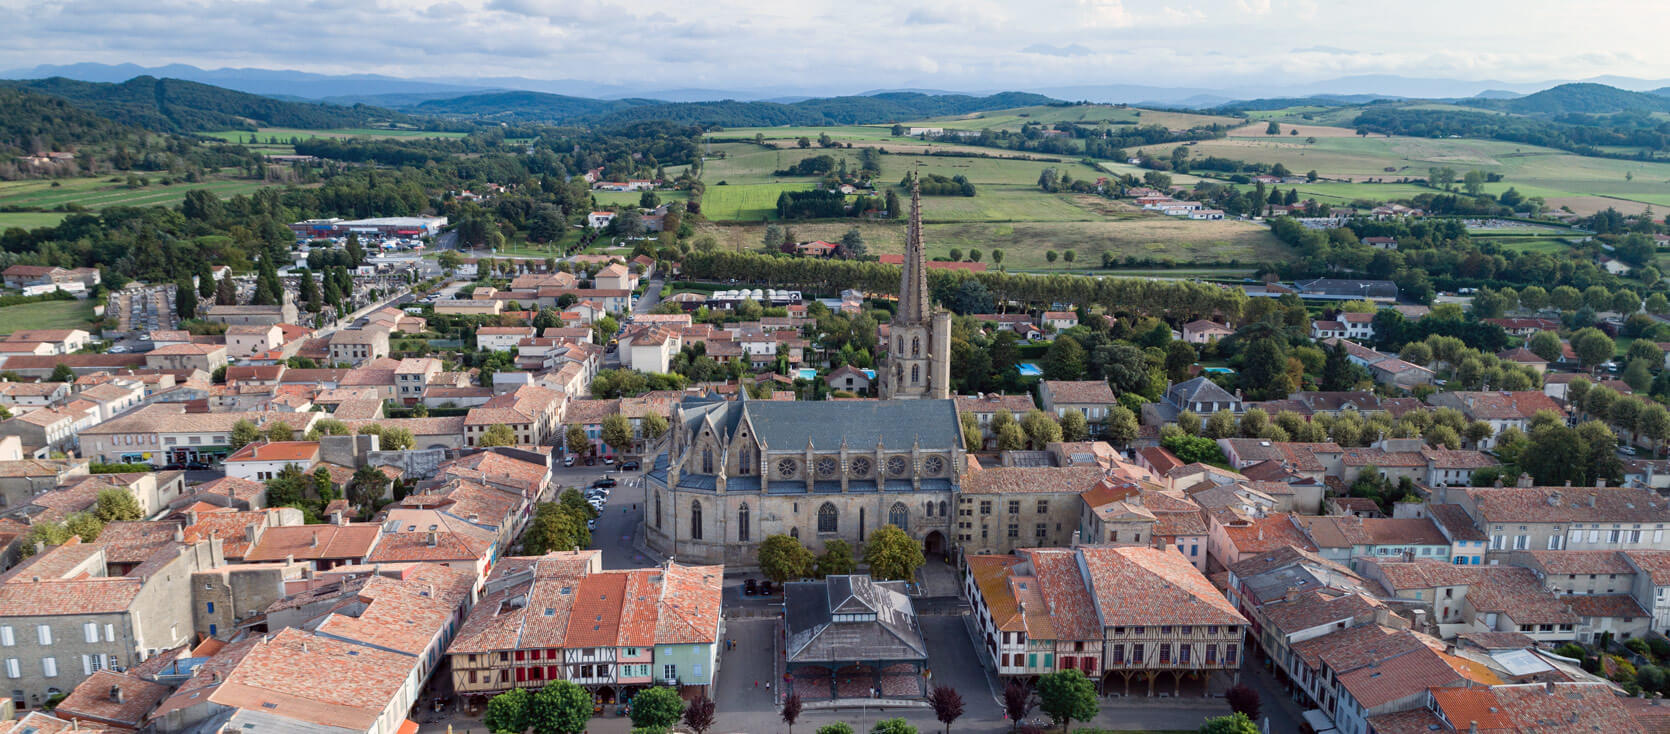 A bird's eye view of the town of Mirepoix, French Pyrenees